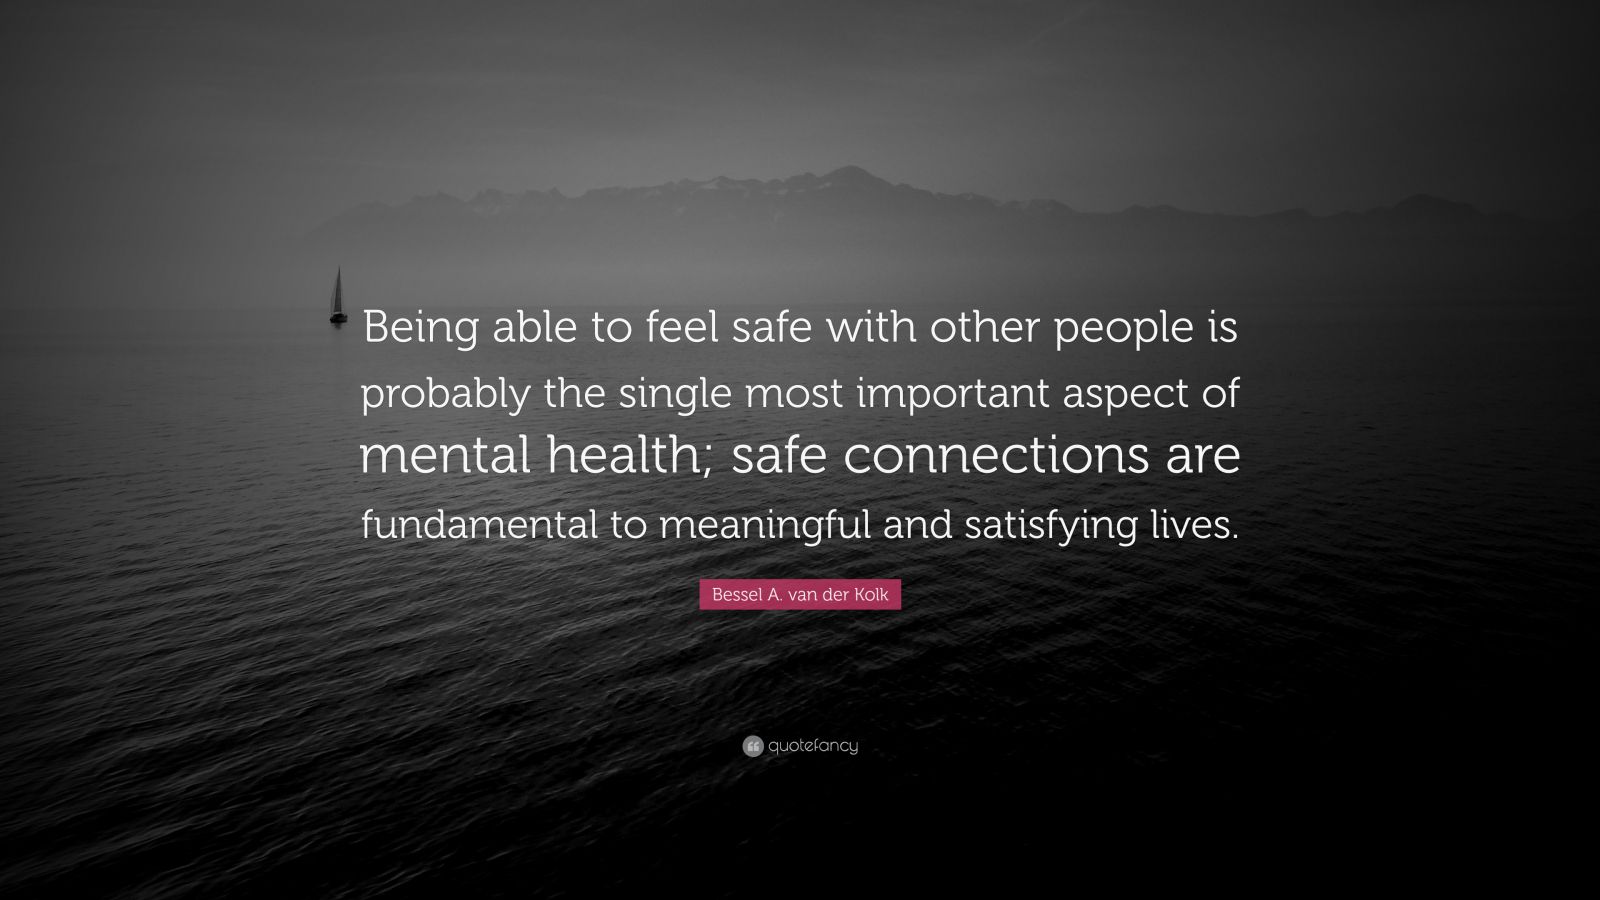 Bessel A. van der Kolk Quote: “Being able to feel safe with other